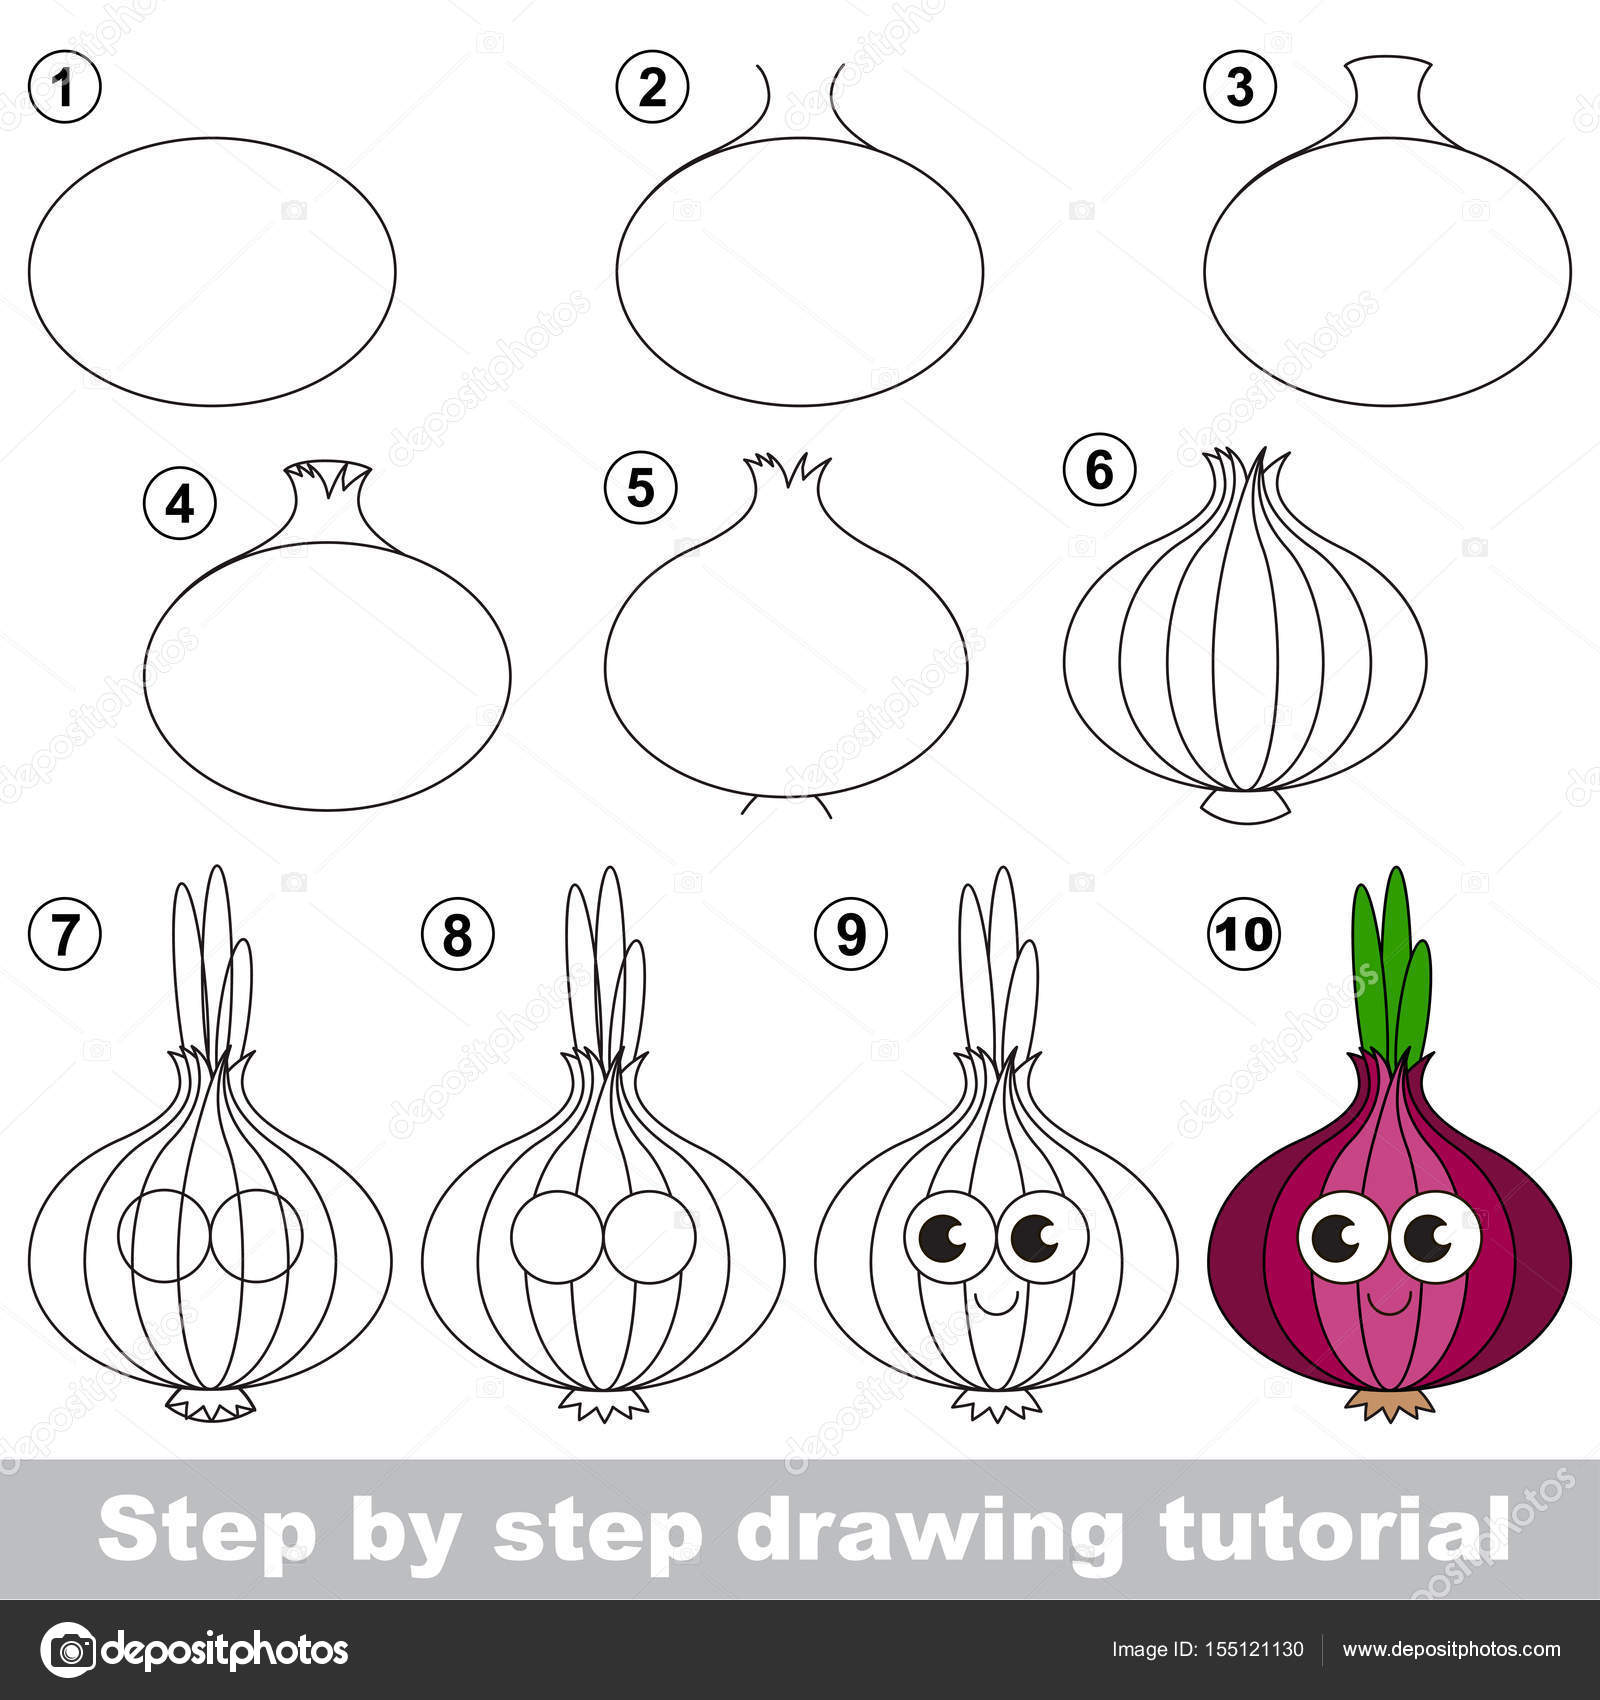 How to draw an onion easy step by step for kids - YouTube